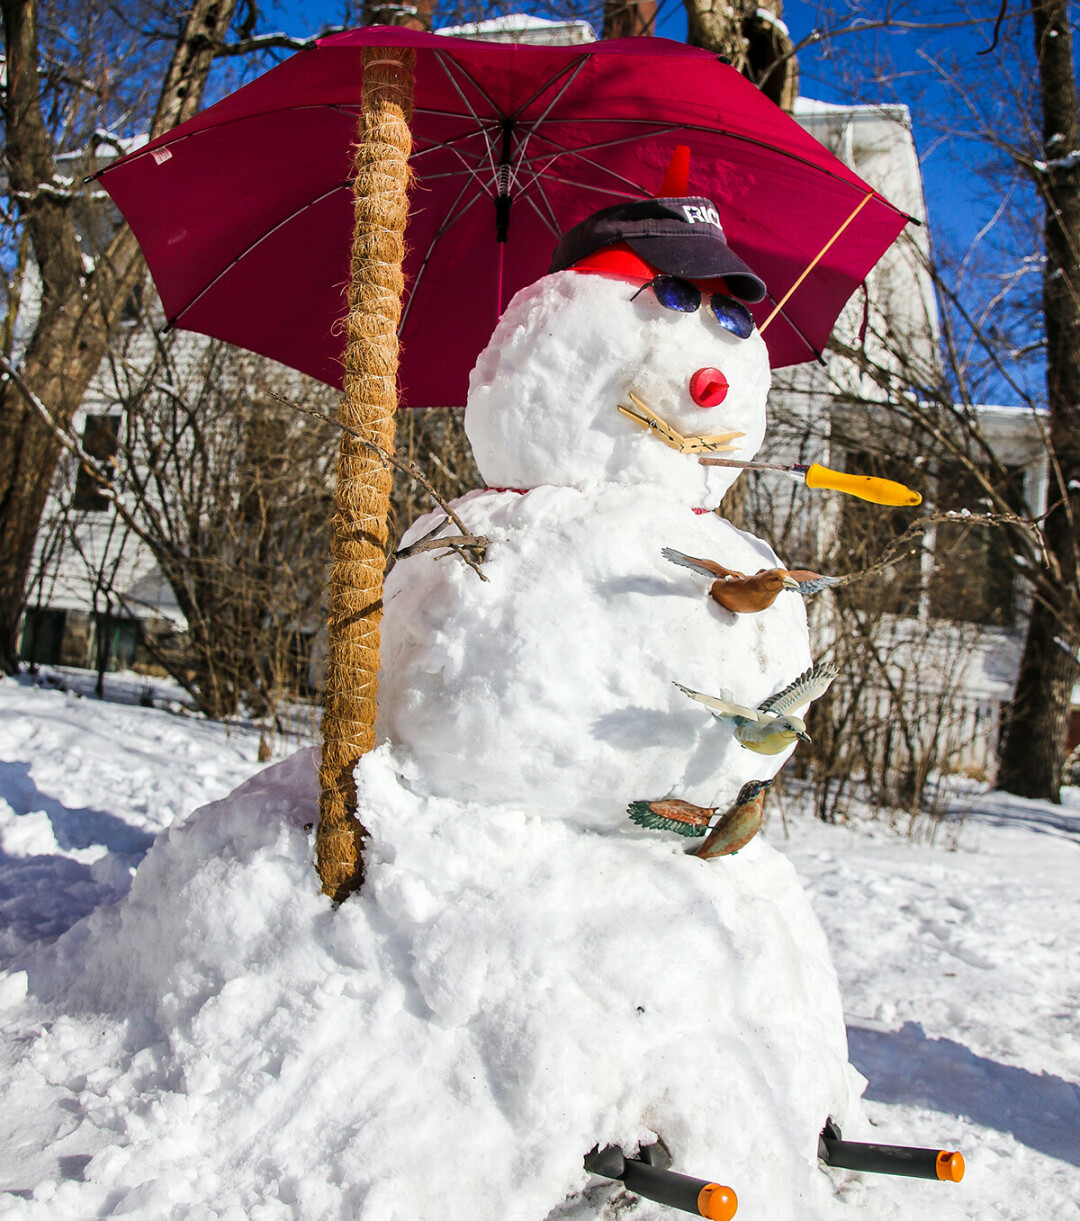 SNOW FUN. When life gives you snow, make a snowman – like this guy from a couple of winters ago.